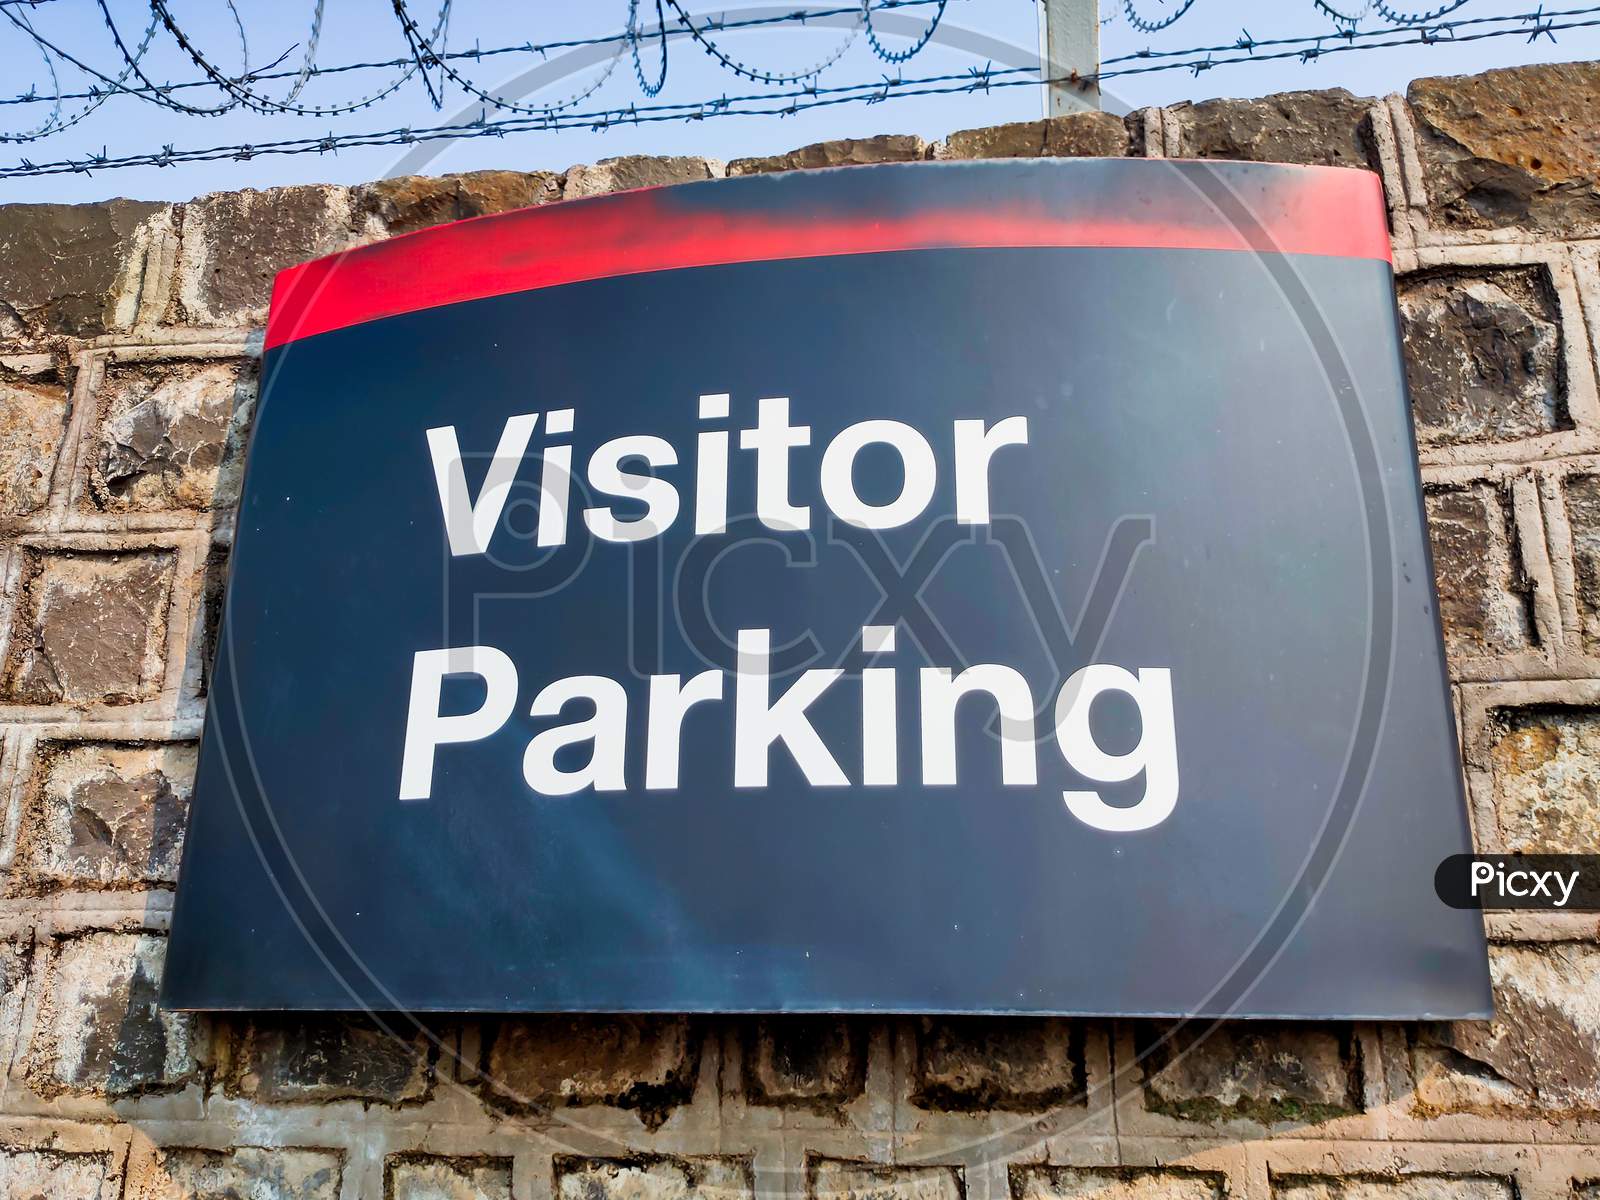 Visitor Parking sign in a parking lot.